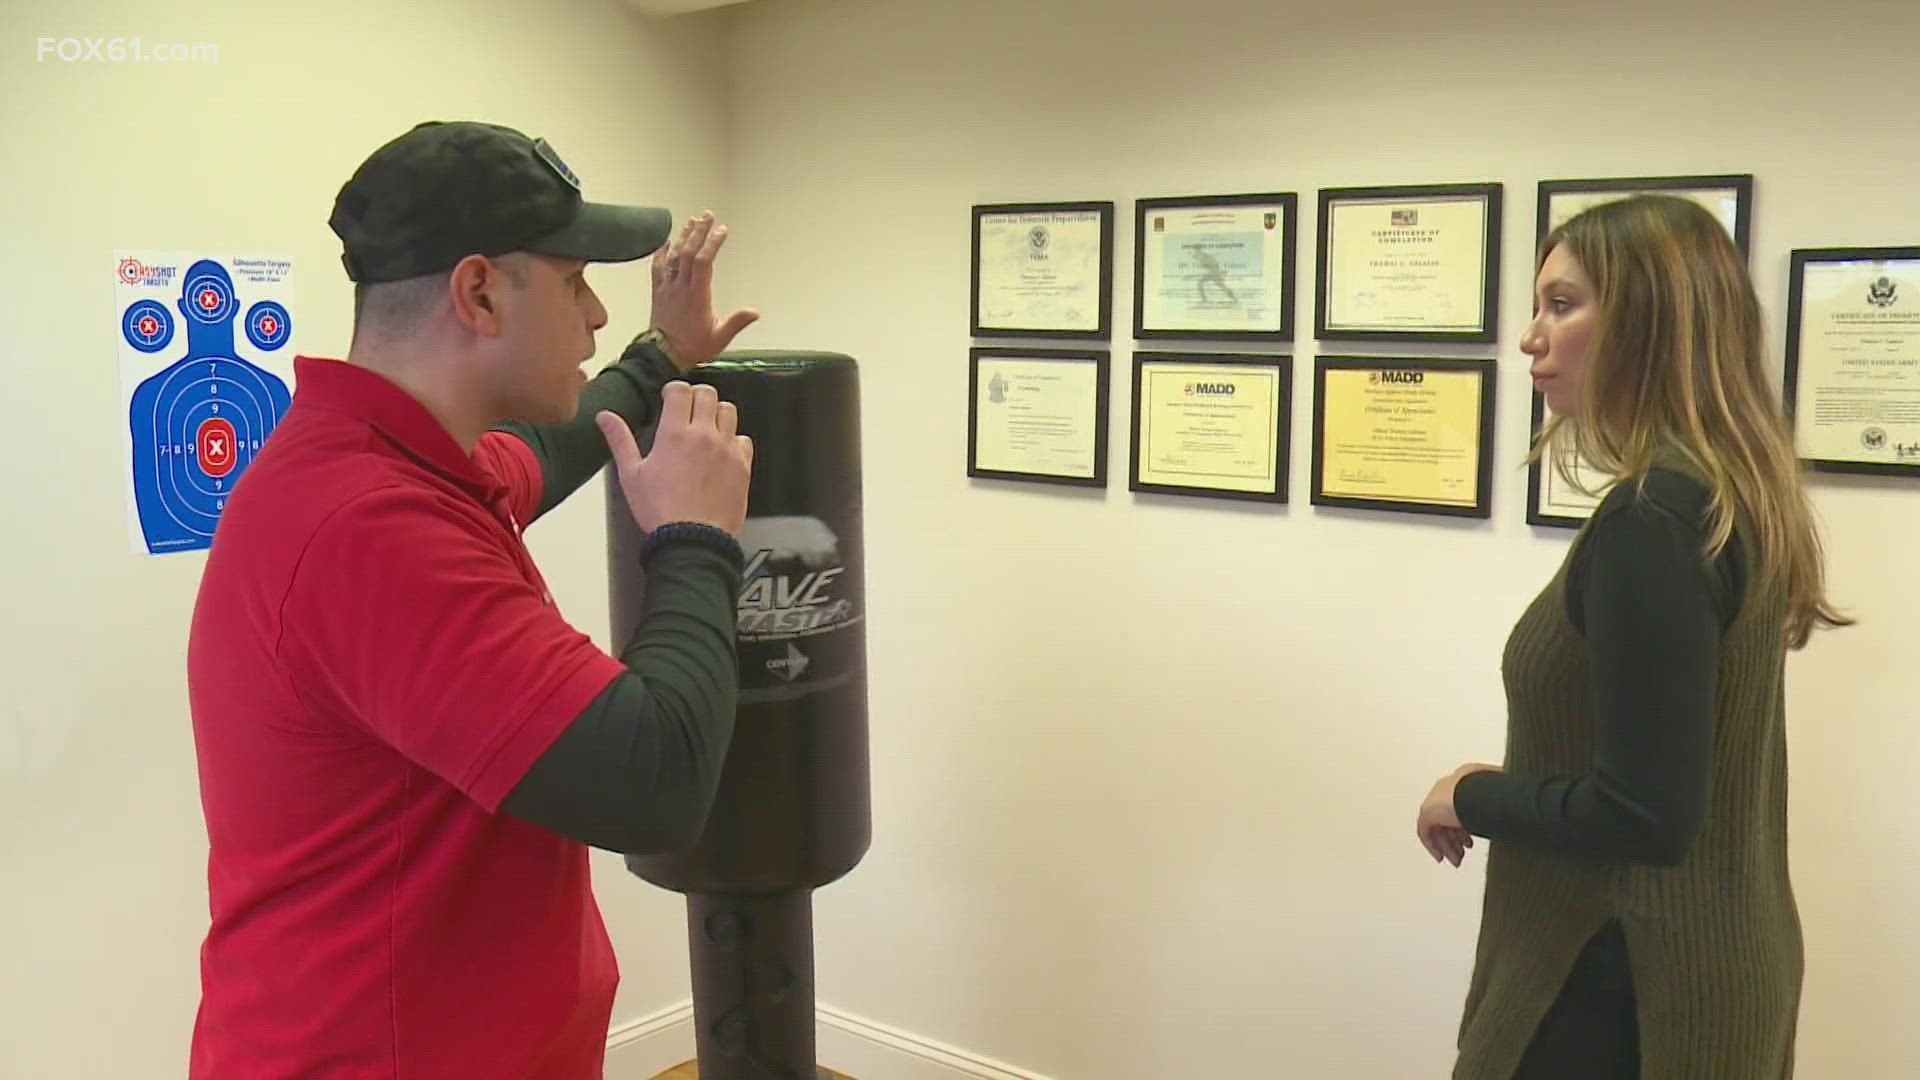 As robberies and burglaries have become more prevalent in the state, self-defense businesses are seeing an increase of people learning how to protect themselves.